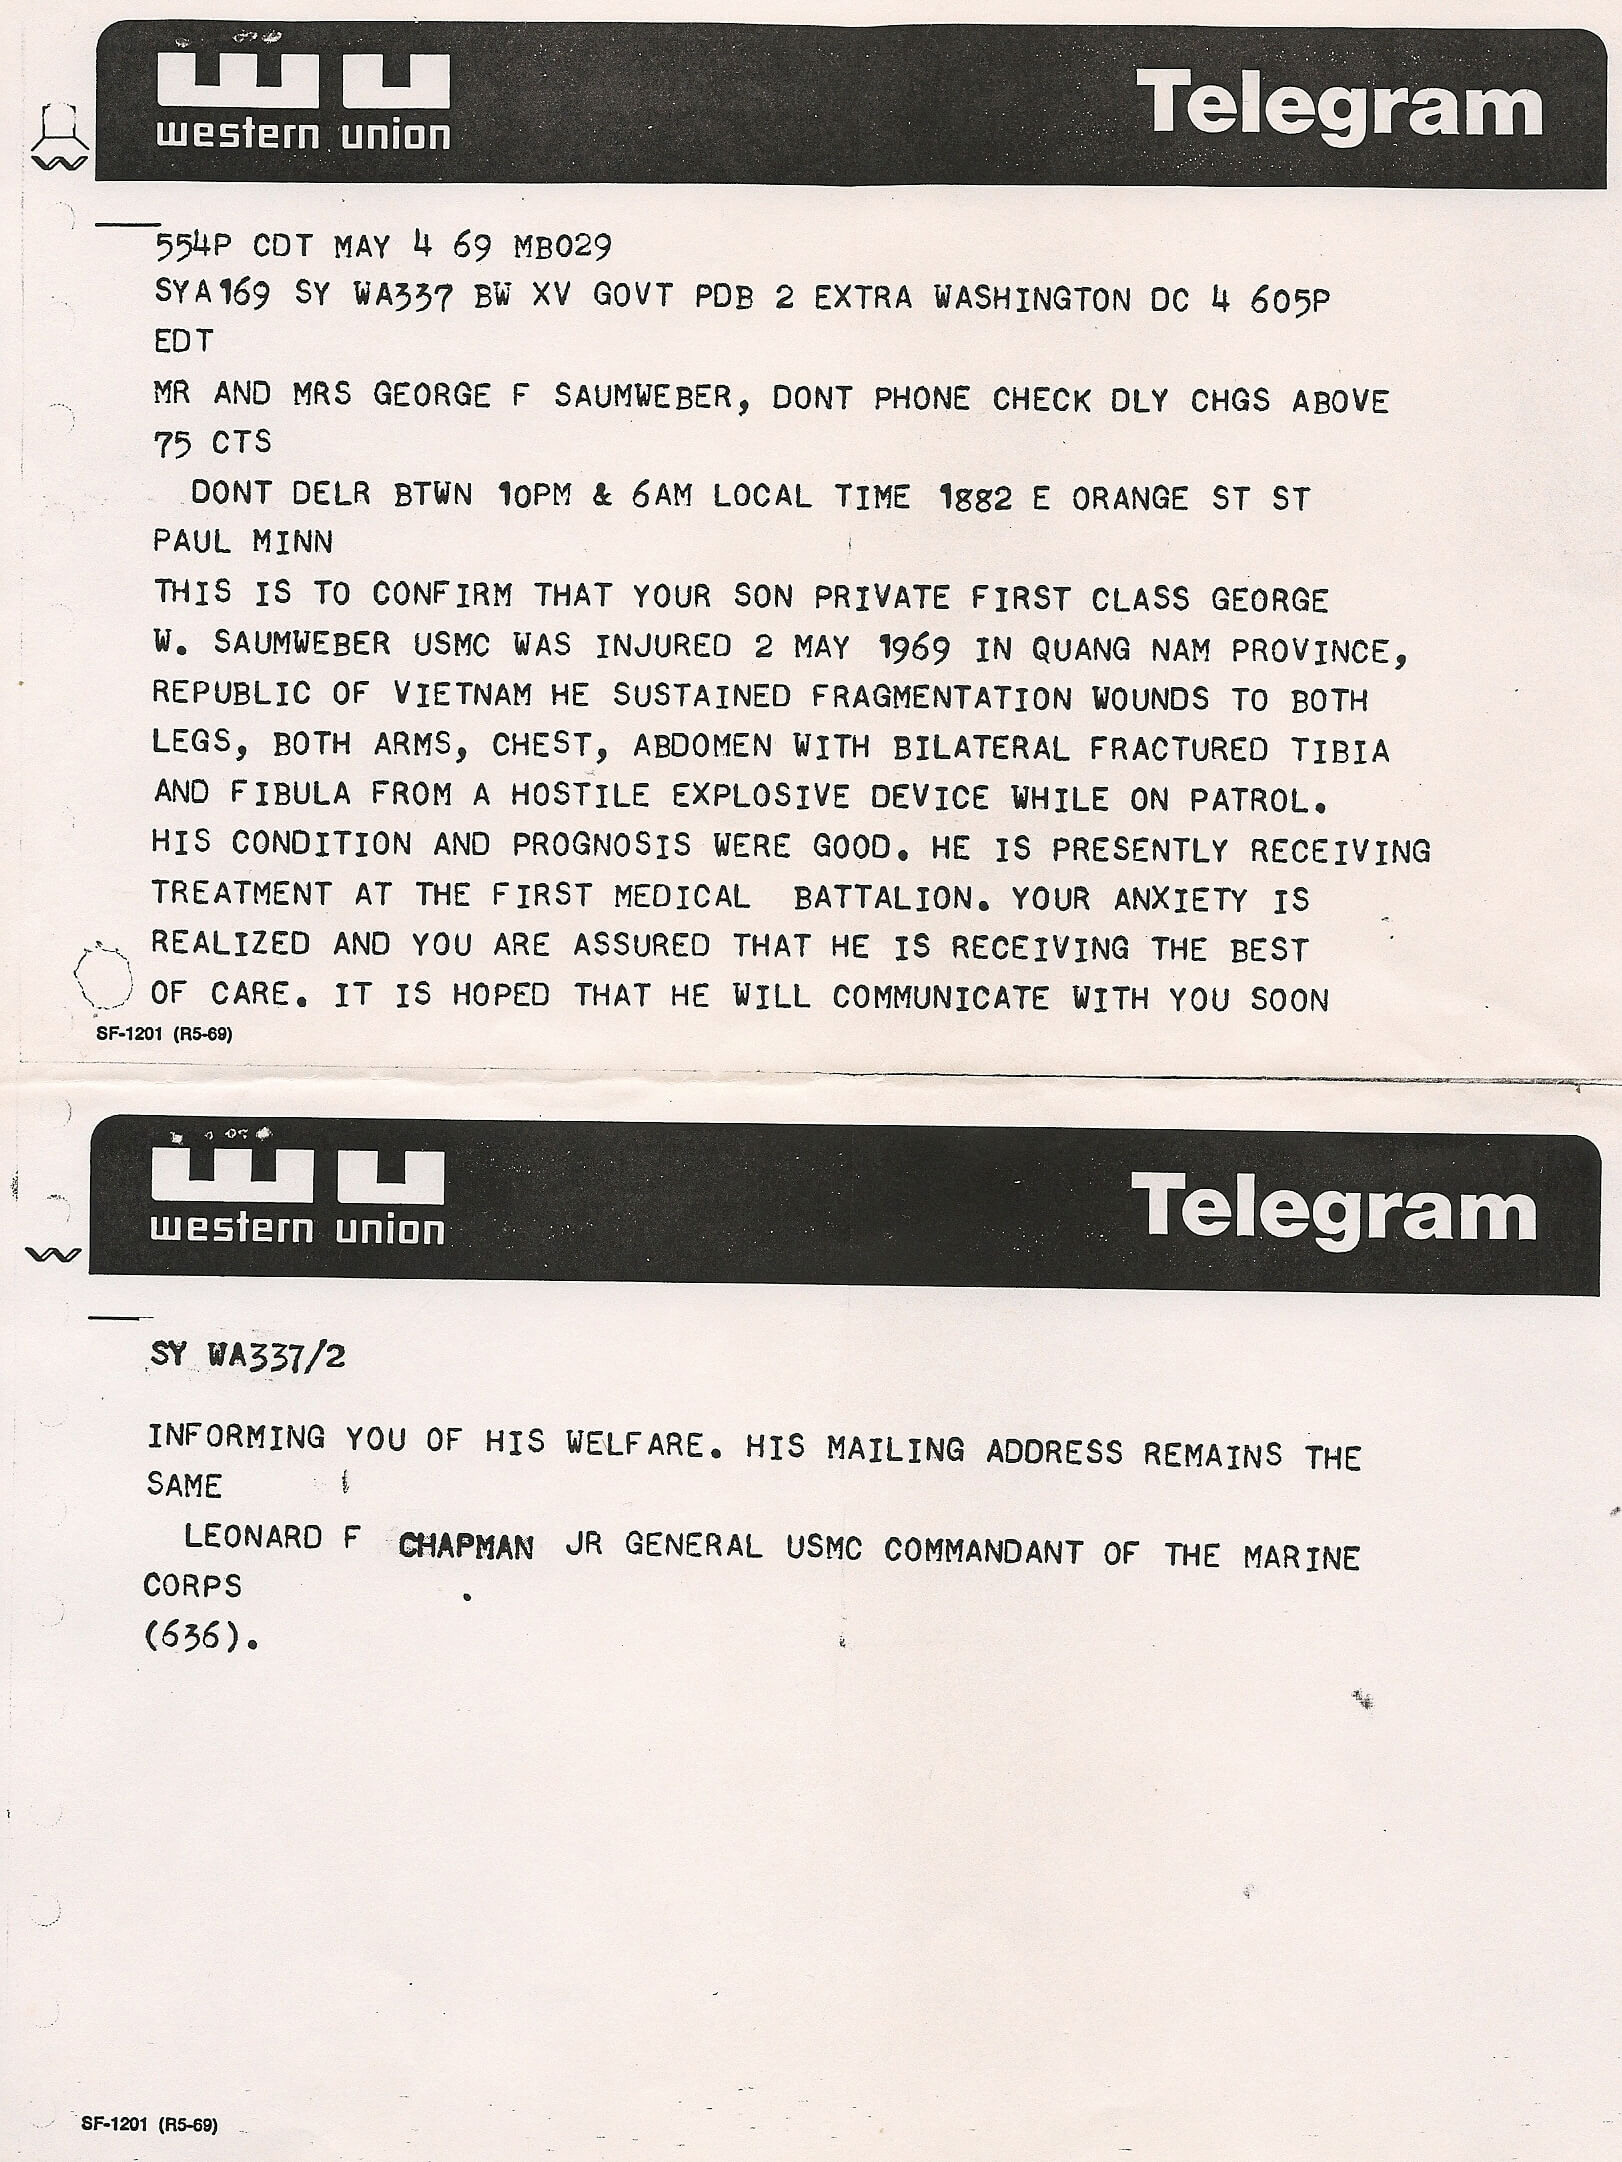 A Western Union telegram to parents detailing the injury of a son. "... he sustained fragmentation wounds to both legs, both arms, chest, abdomen with bilateral tibia and fibula from a hostile explosive device while on patrol..."